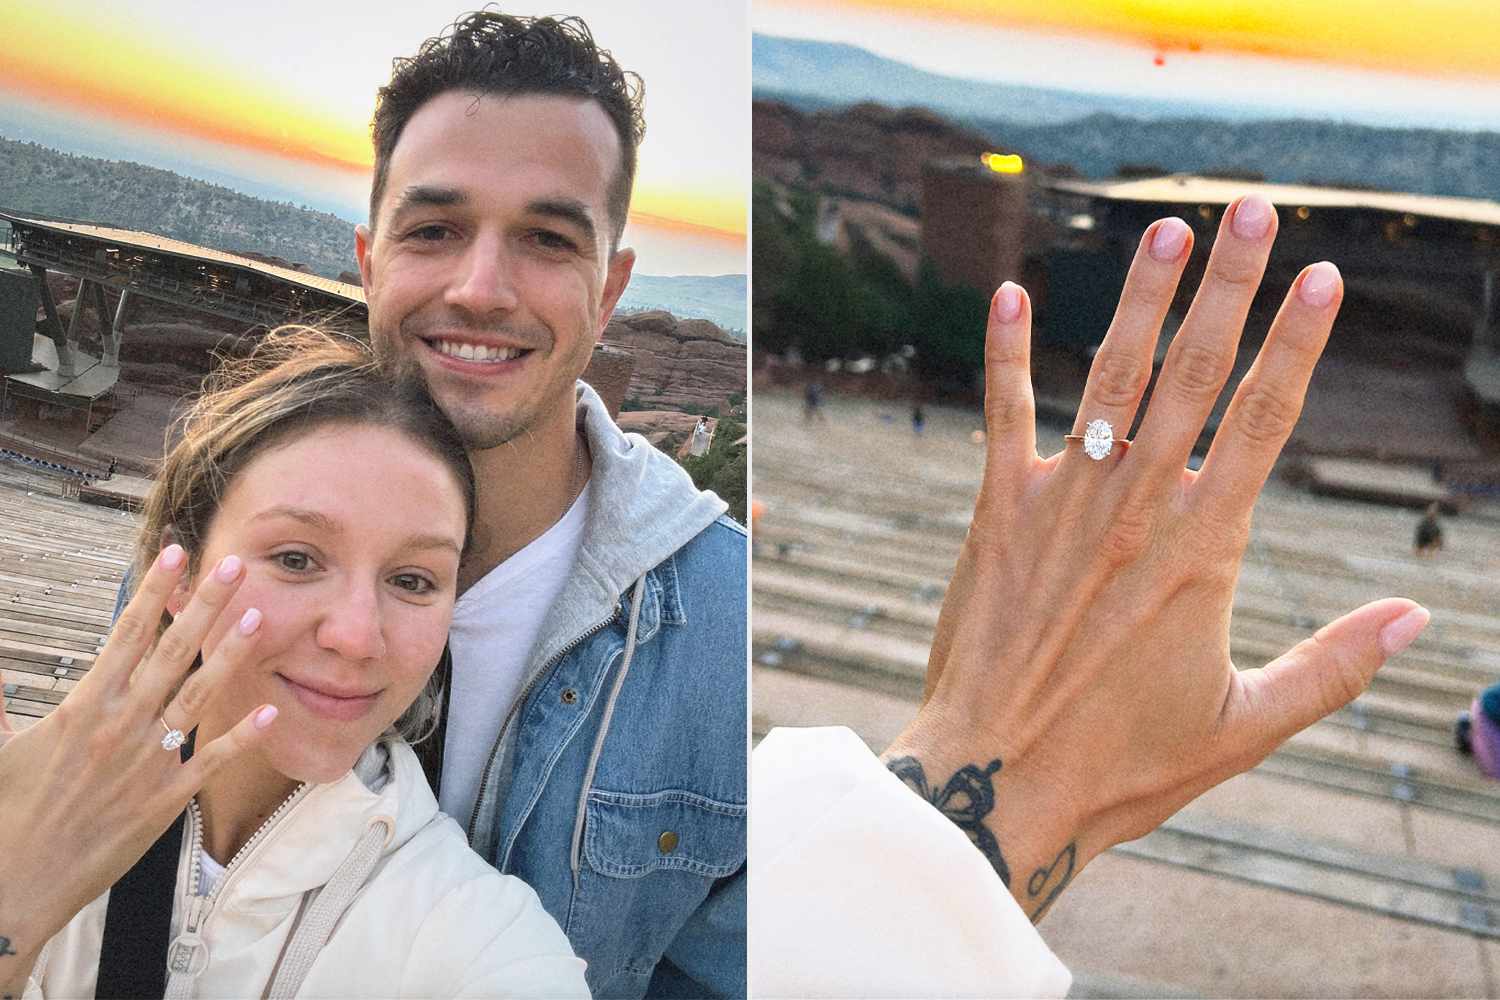 Bride-to-Be Finds Missing Engagement Ring After Posting on TikTok (Exclusive) [Video]